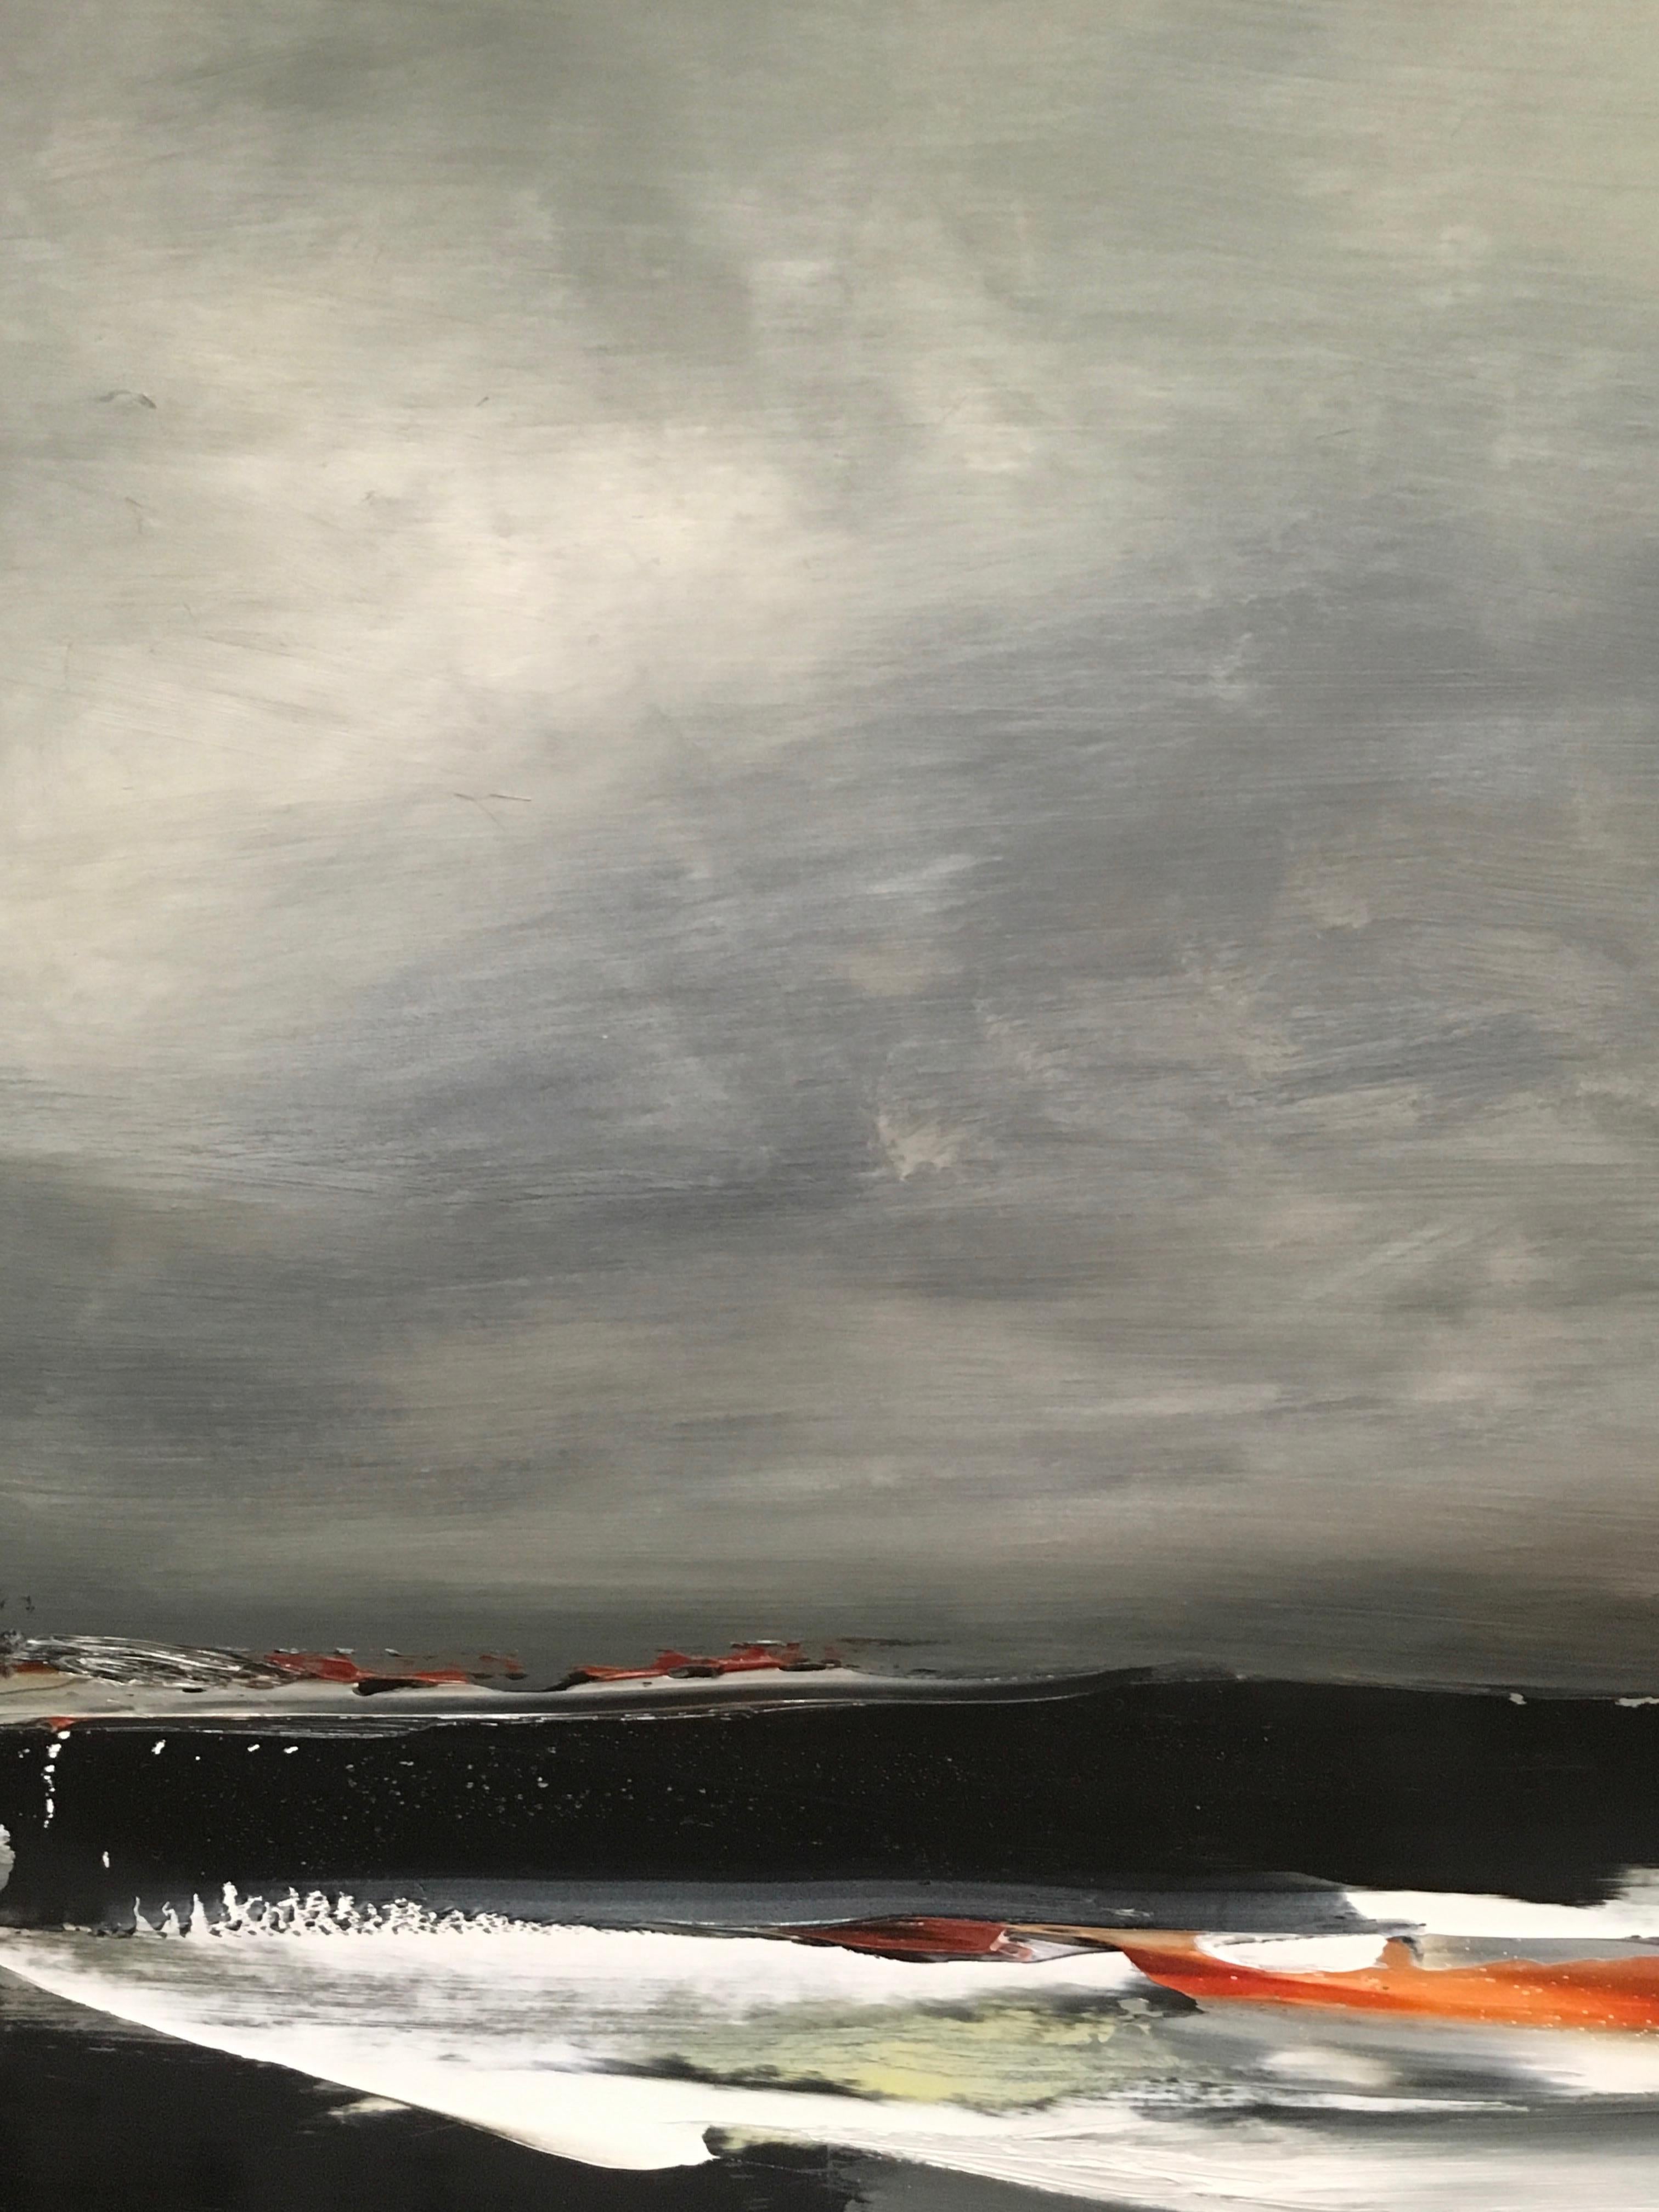 Shore III, Oil on Board, 21x18.  It is framed.  It is a stormy, abstracted landscape in a Hudson River School painting style.

In Sharon Gordon's landscapes, you can feel her deep connection and passion for the ever-changing nature of large bodies